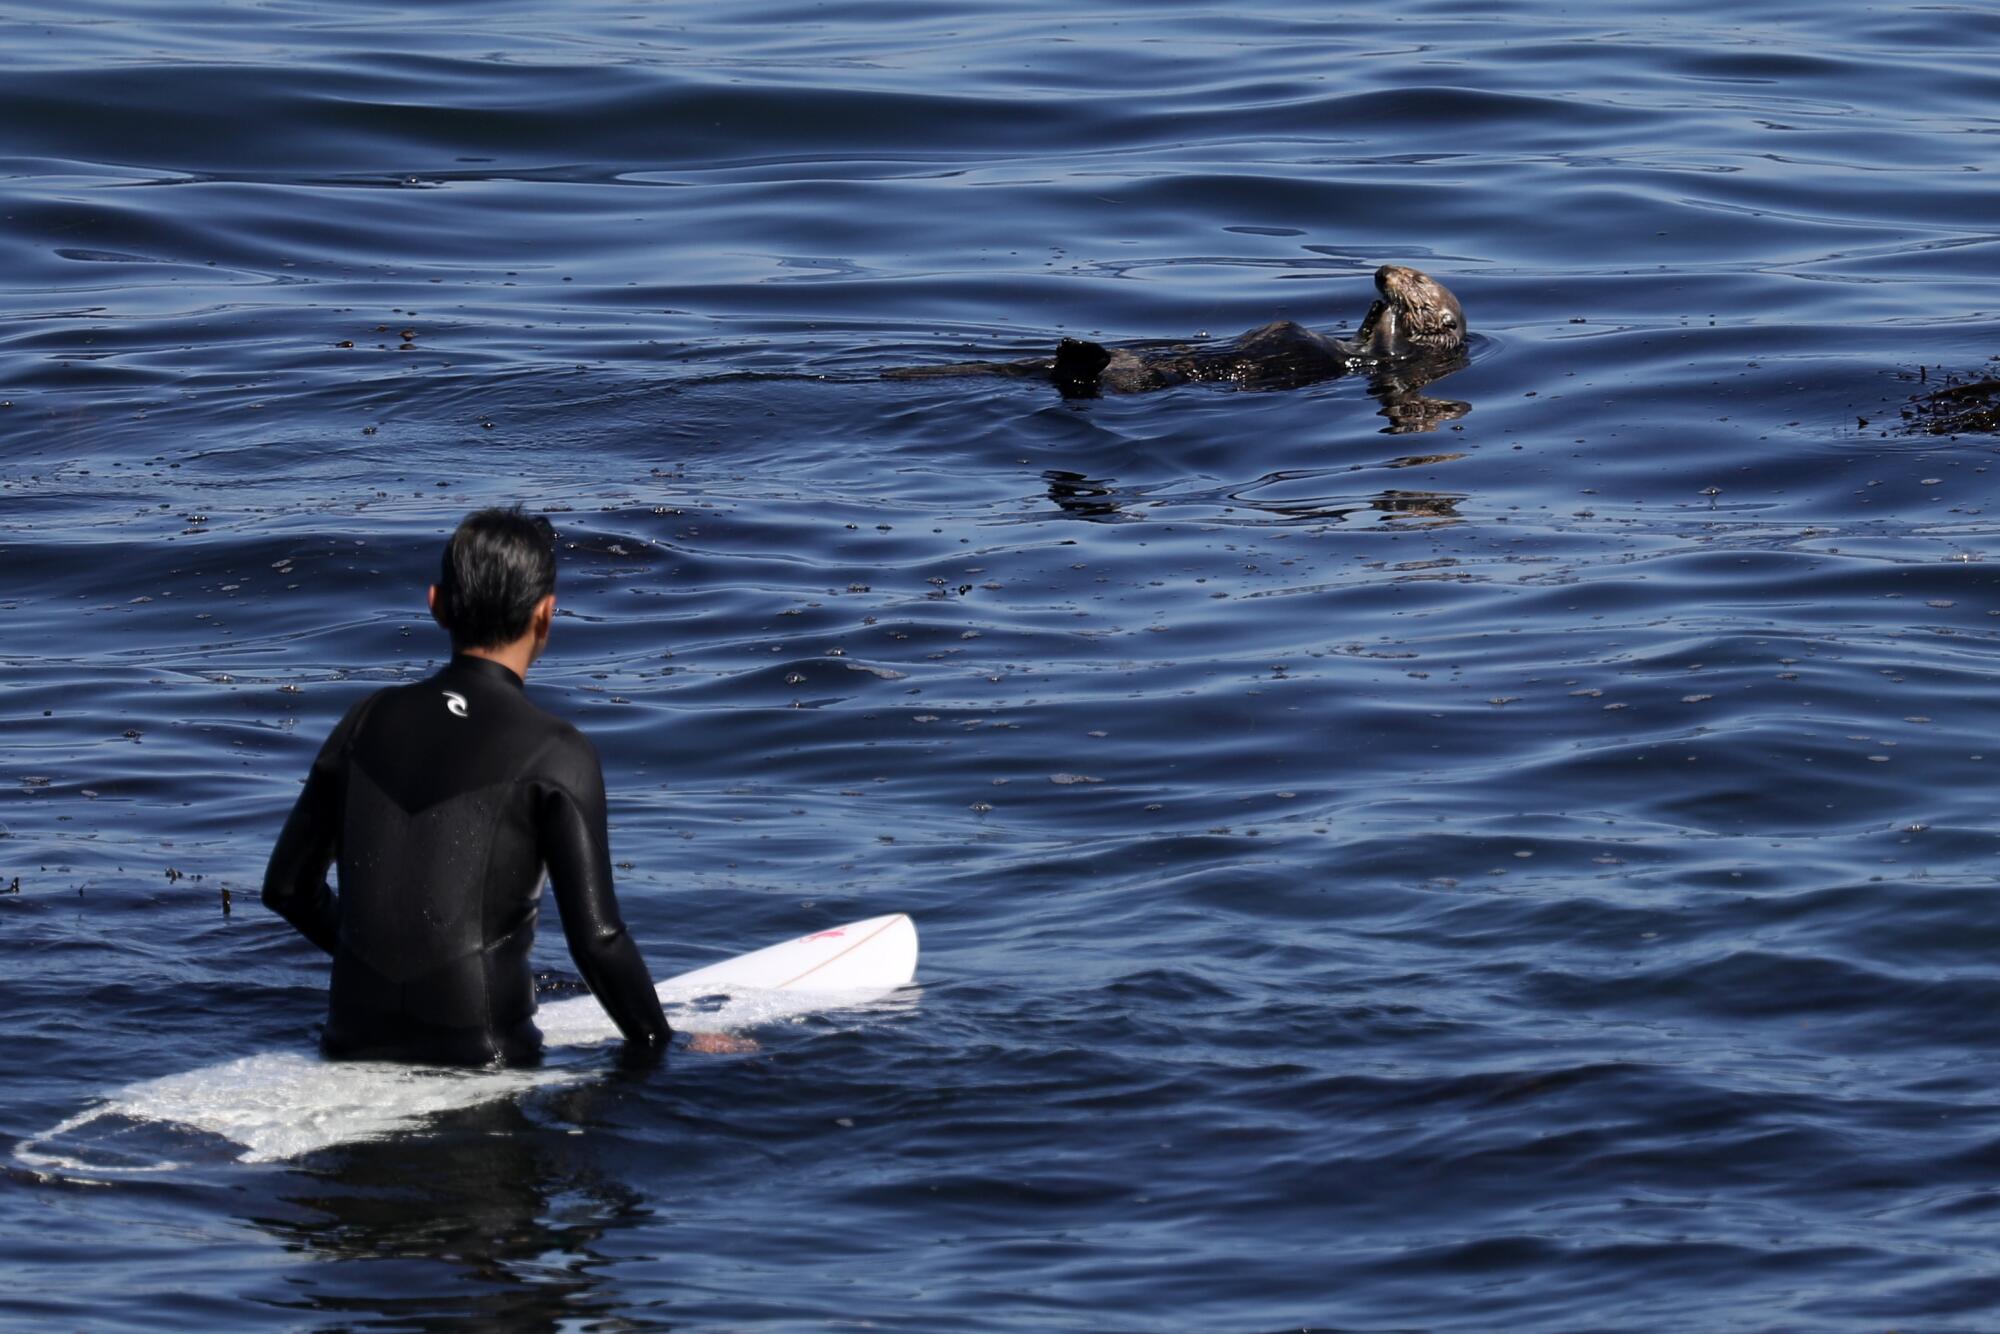 A man in a dark wet suit on a surfboard looks at an otter floating on its back